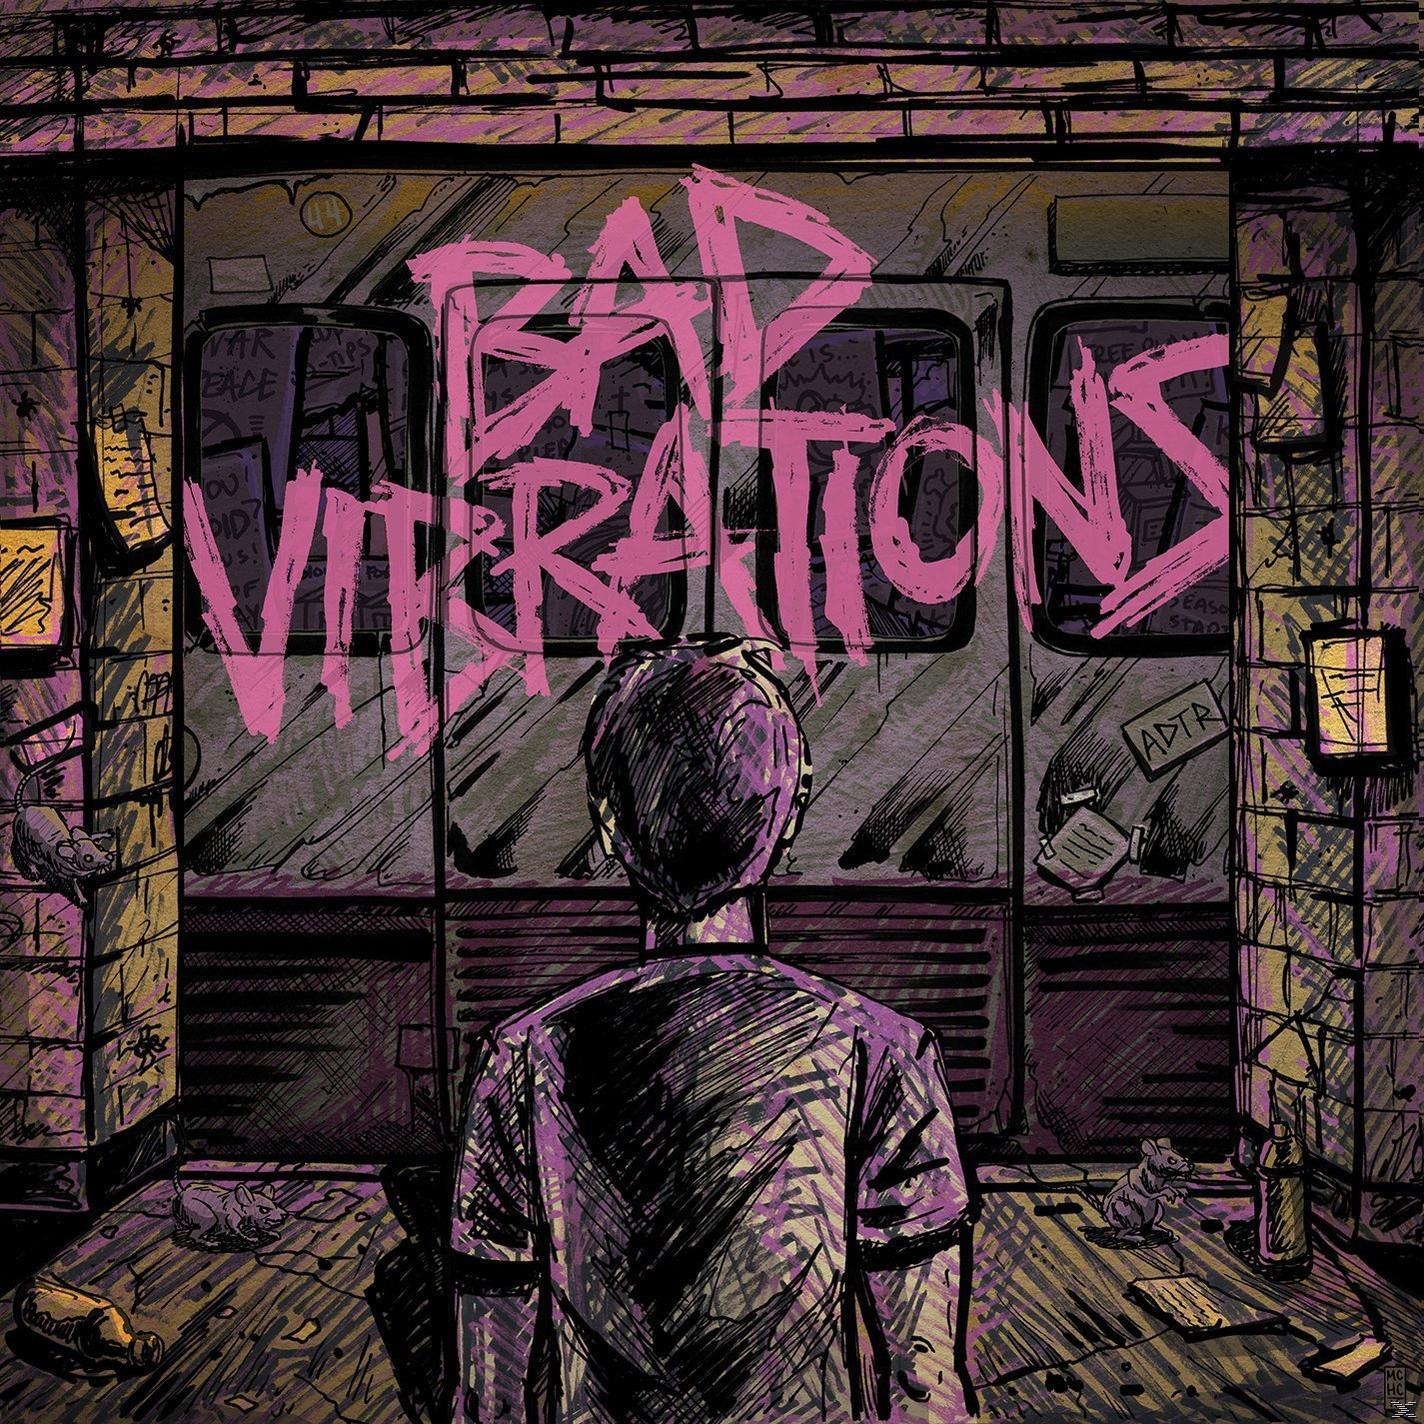 - To Edition (CD) Bad - Vibrations-Deluxe A Day Remember